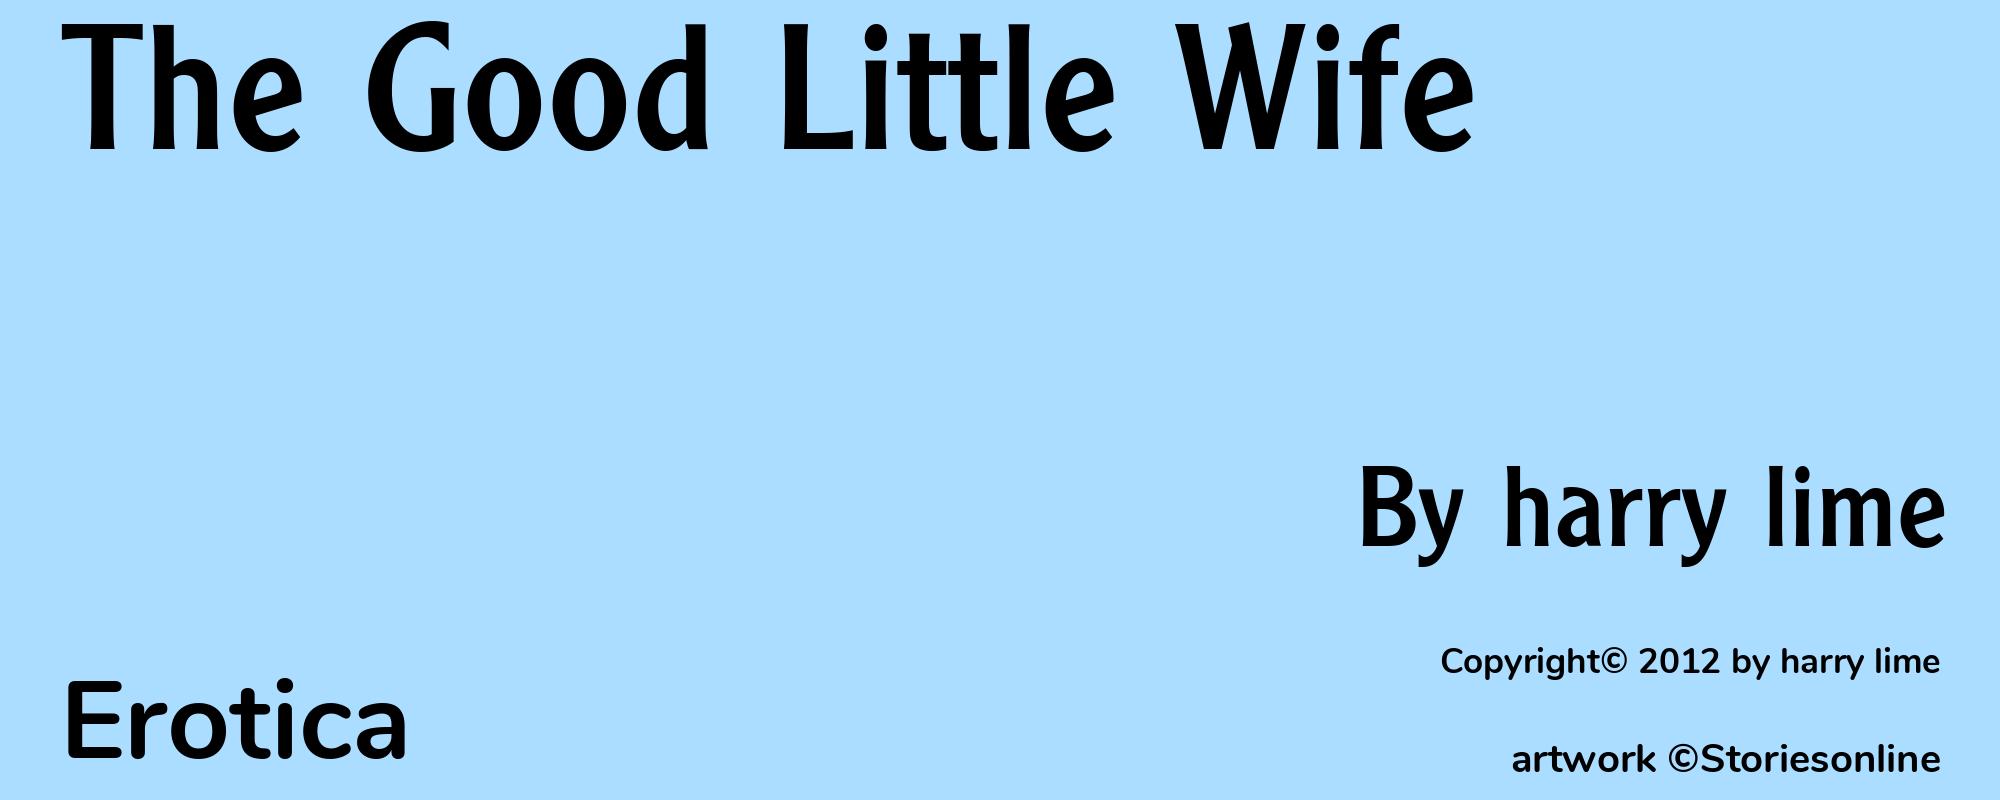 The Good Little Wife - Cover